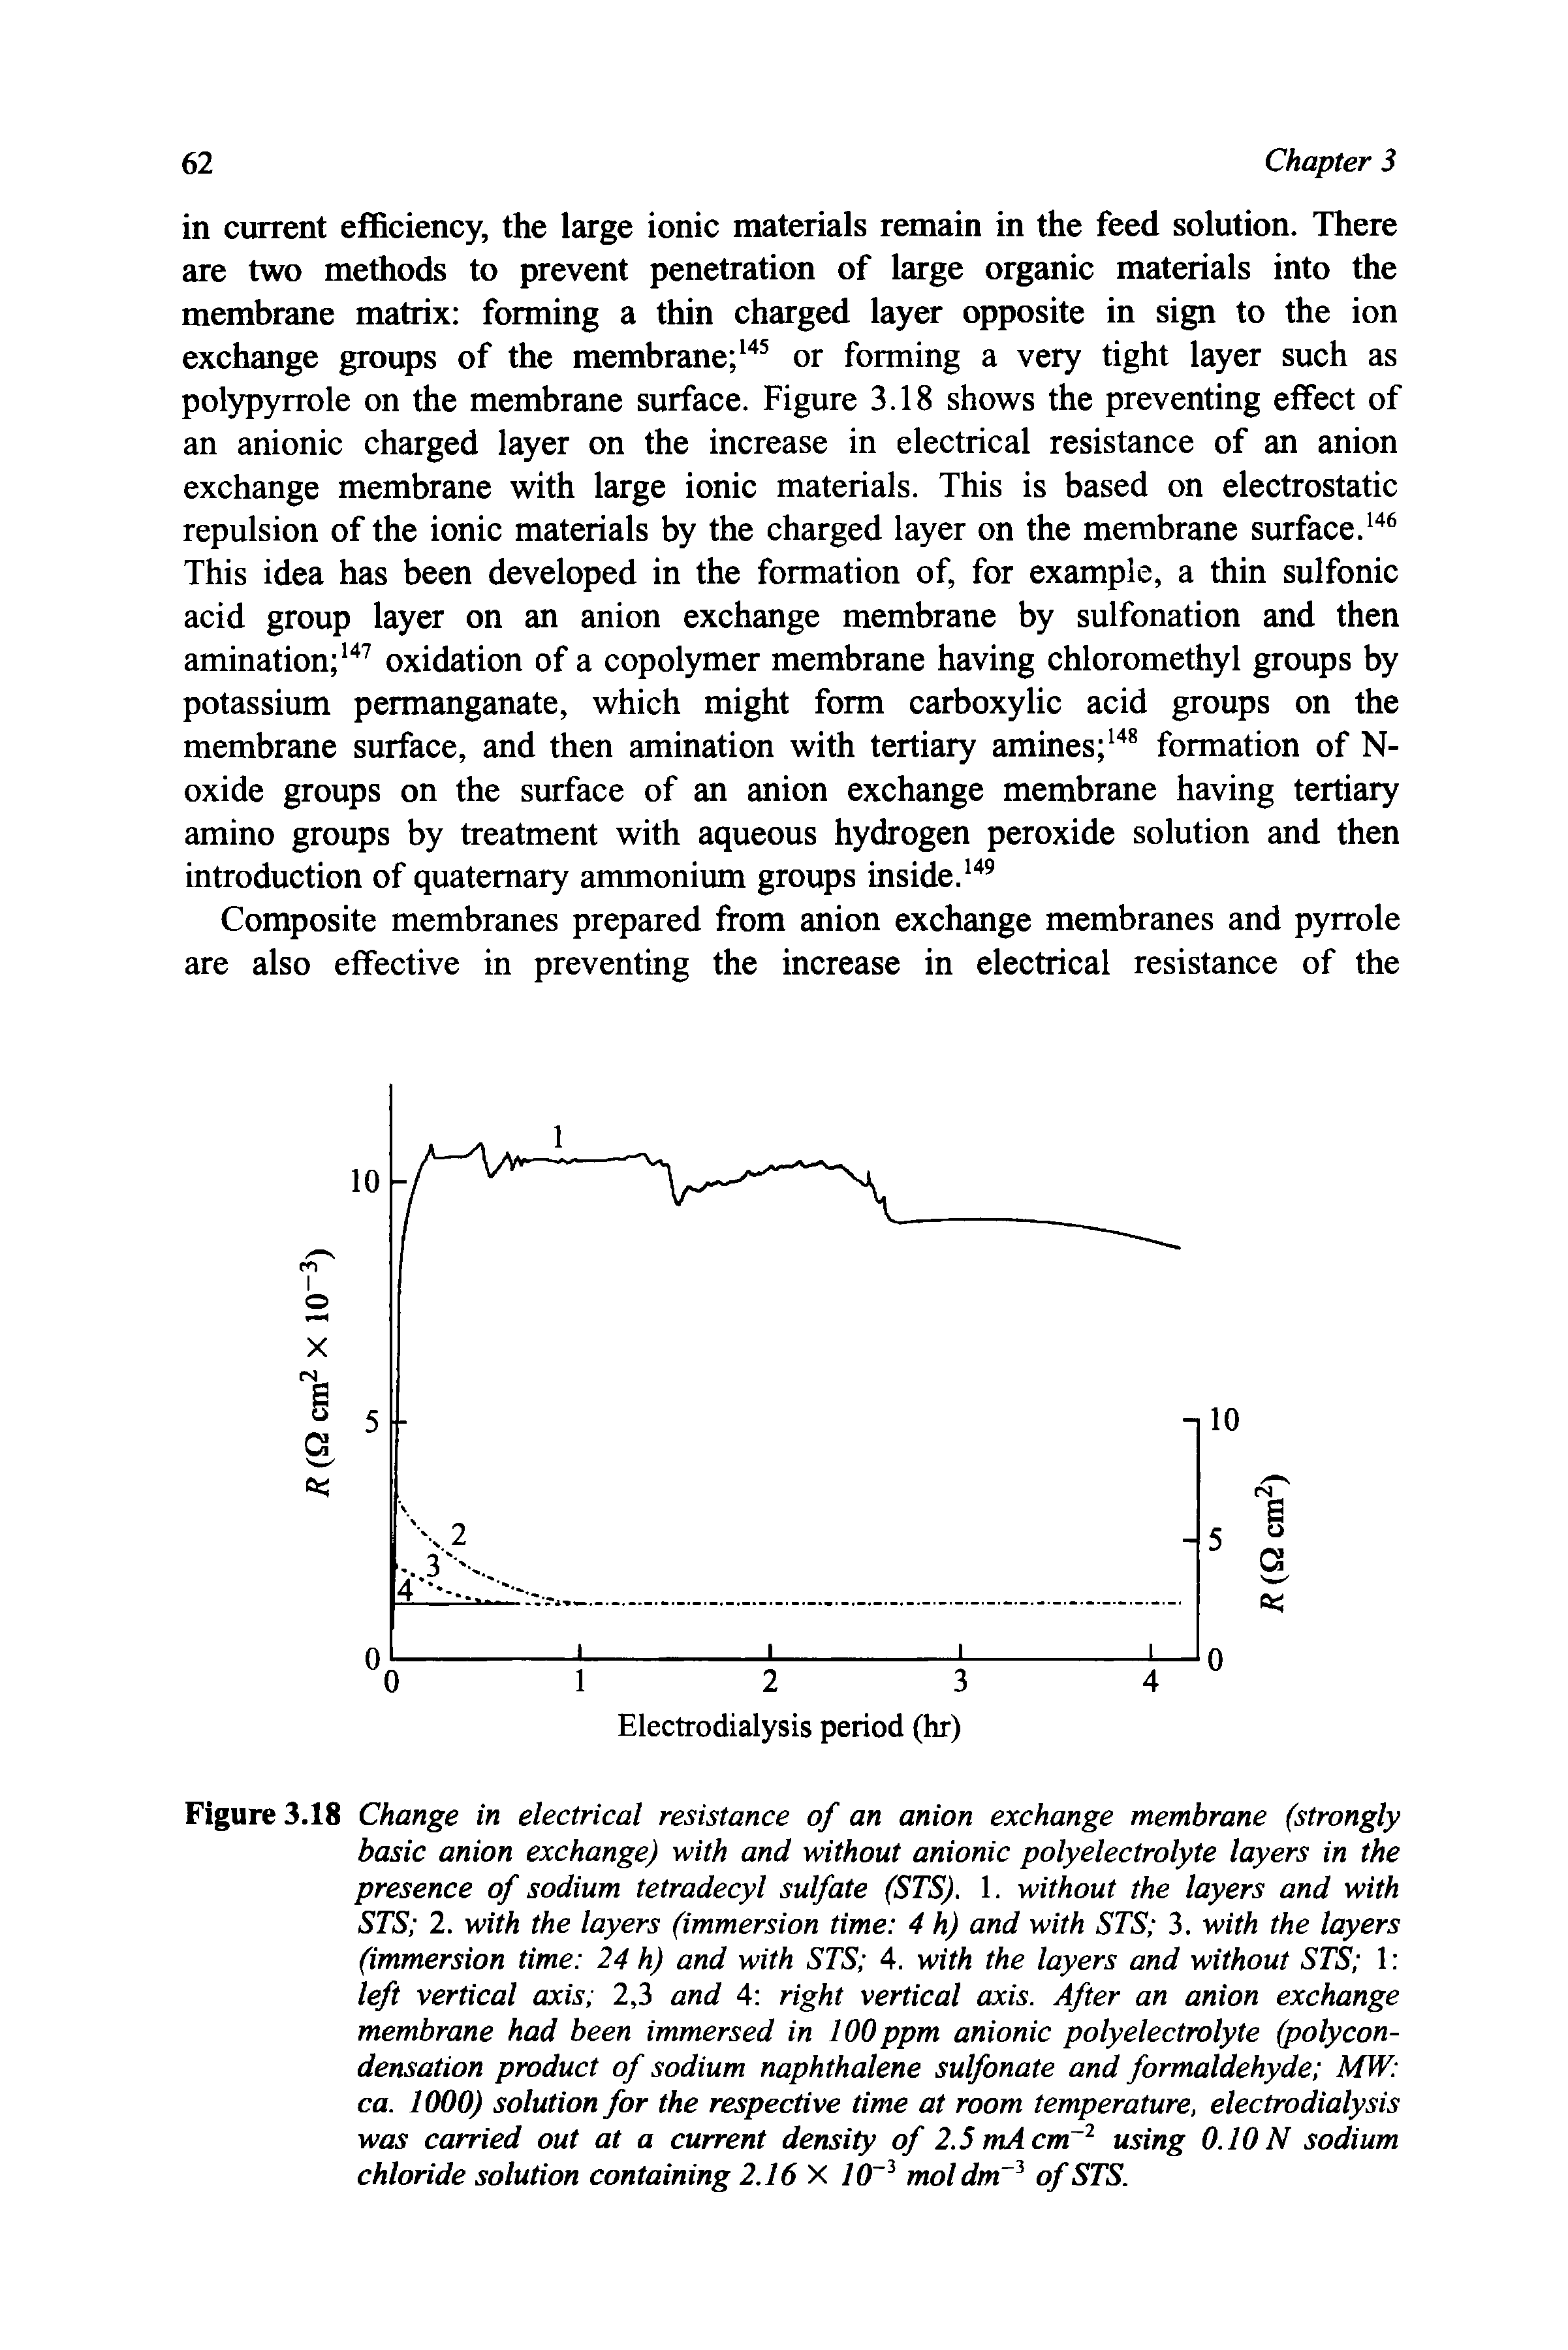 Figure 3.18 Change in electrical resistance of an anion exchange membrane (strongly basic anion exchange) with and without anionic polyelectrolyte layers in the presence of sodium tetradecyl sulfate (STS). 1. without the layers and with STS 2. with the layers (immersion time 4 h) and with STS 3. with the layers (immersion time 24 h) and with STS 4. with the layers and without STS 1 left vertical axis 2,3 and 4 right vertical axis. After an anion exchange membrane had been immersed in 100ppm anionic polyelectrolyte (polycondensation product of sodium naphthalene sulfonate and formaldehyde MW ca. 1000) solution for the respective time at room temperature, electrodialysis was carried out at a current density of 2.5 mAcmr2 using 0.10 N sodium chloride solution containing 2.16 X 10 3 mol dm3 of STS.